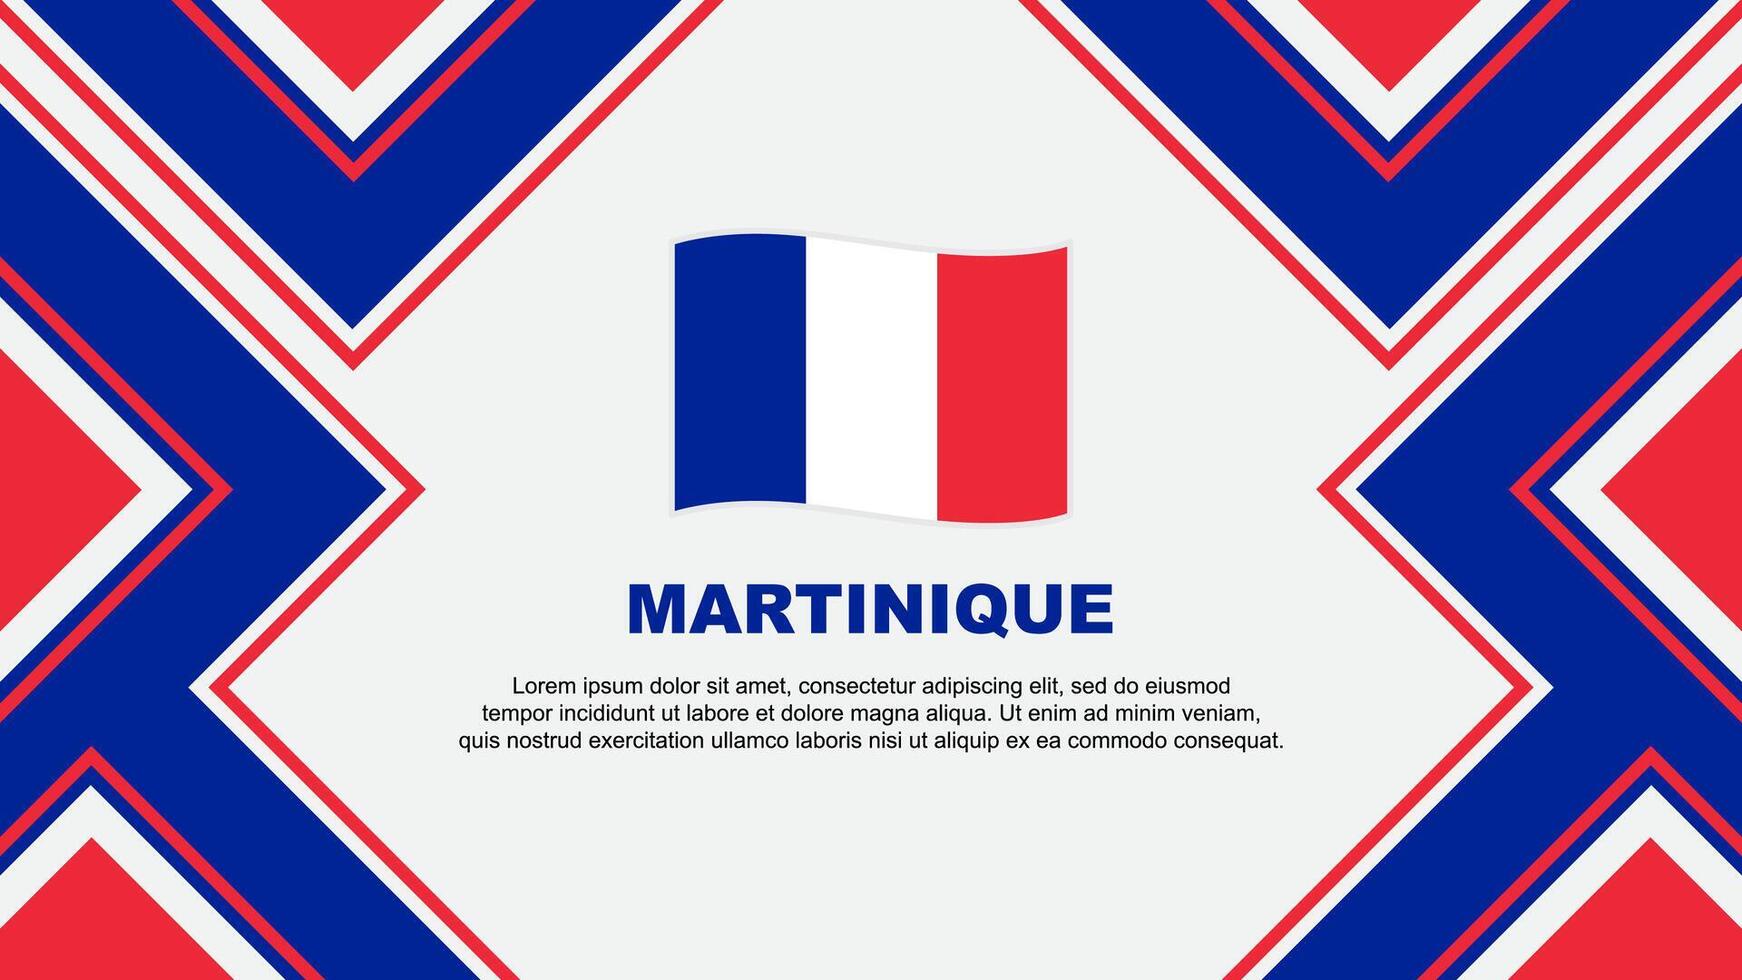 Martinique Flag Abstract Background Design Template. Martinique Independence Day Banner Wallpaper Vector Illustration. Vector